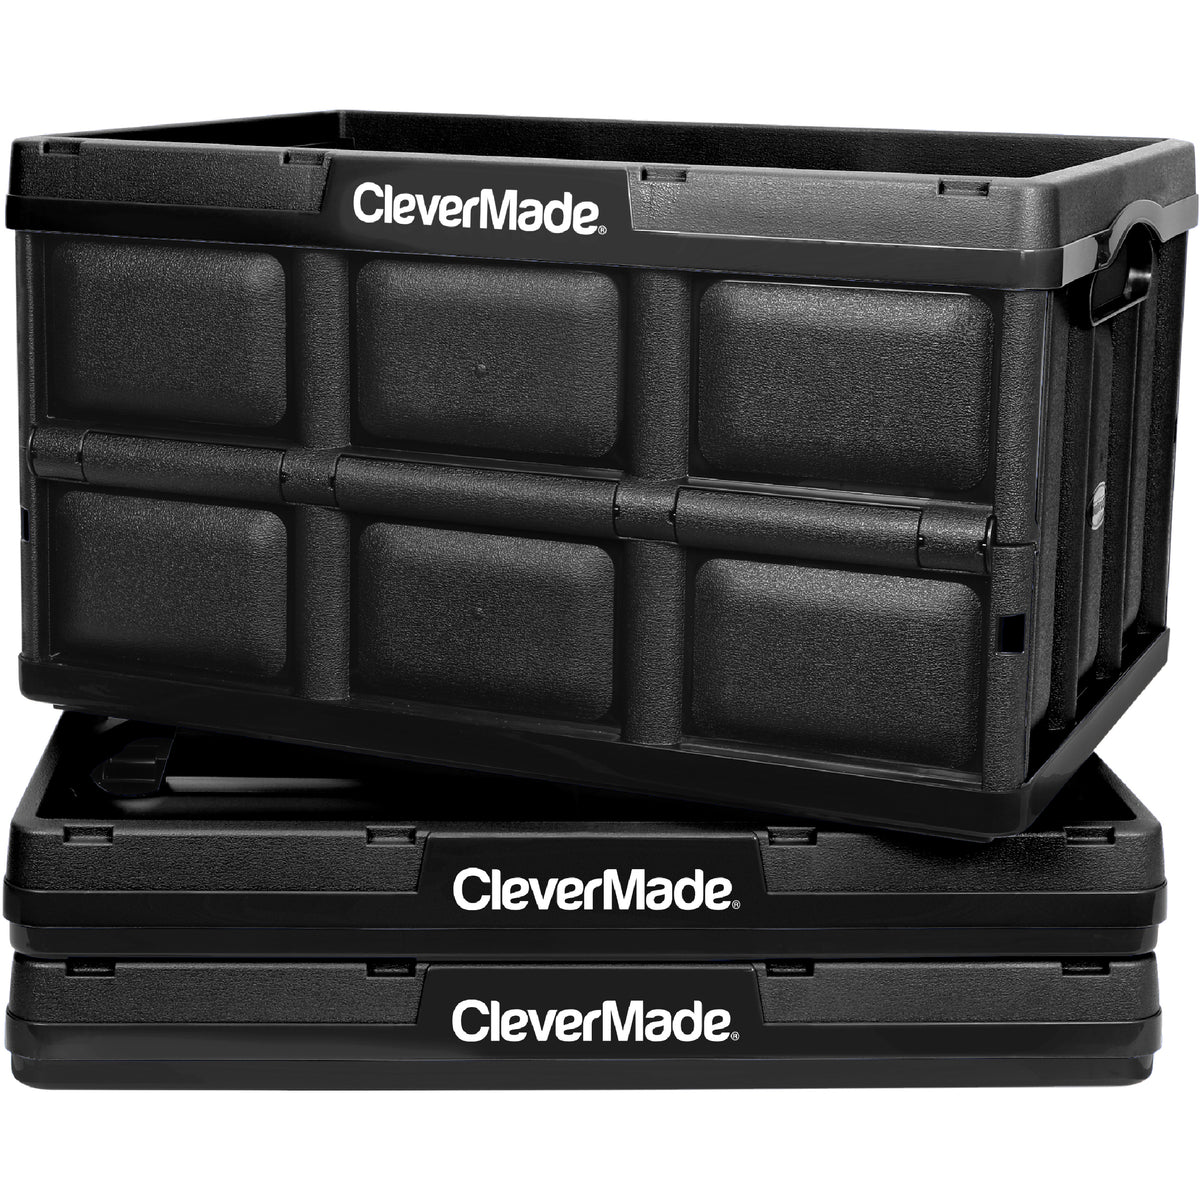 https://www.clevermade.com/cdn/shop/products/32L_200S_AMAZON_Black_Hero3pk_97d7df1d-b41b-460d-8288-801440ffc1af_1200x.jpg?v=1634940605